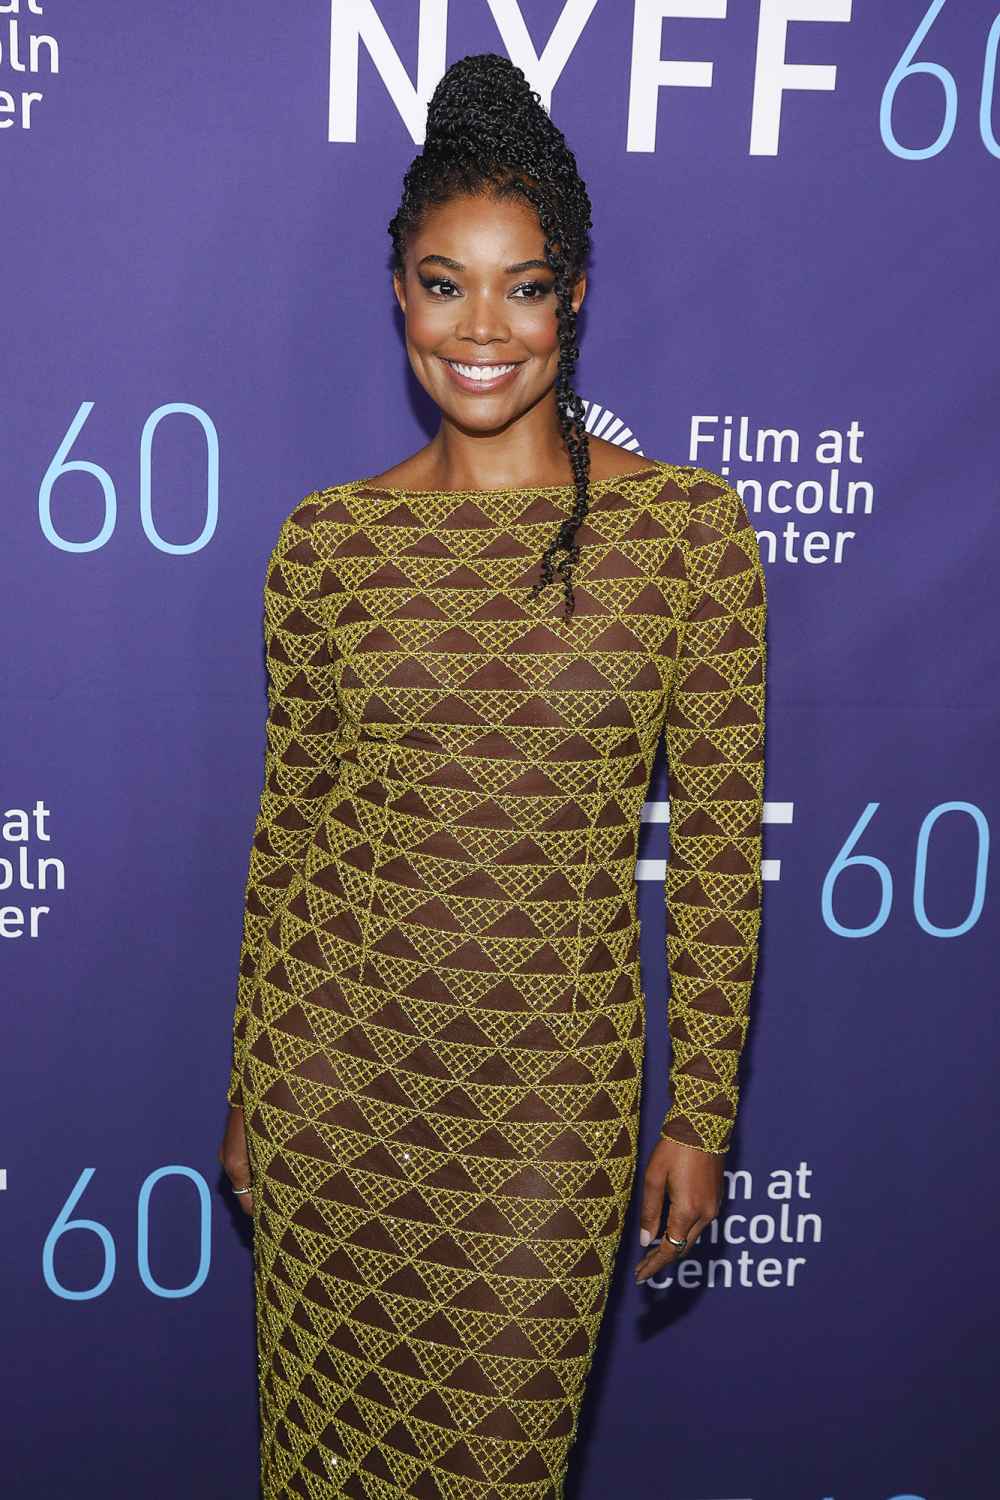 Gabrielle Union Was Shocked That Husband Dwyane Wade Tattooed Her Initials on His Wrist- The ‘Best Bday Gift’ 257 2022 NYFF - "The Inspection" Premiere, New York, United States - 14 Oct 2022